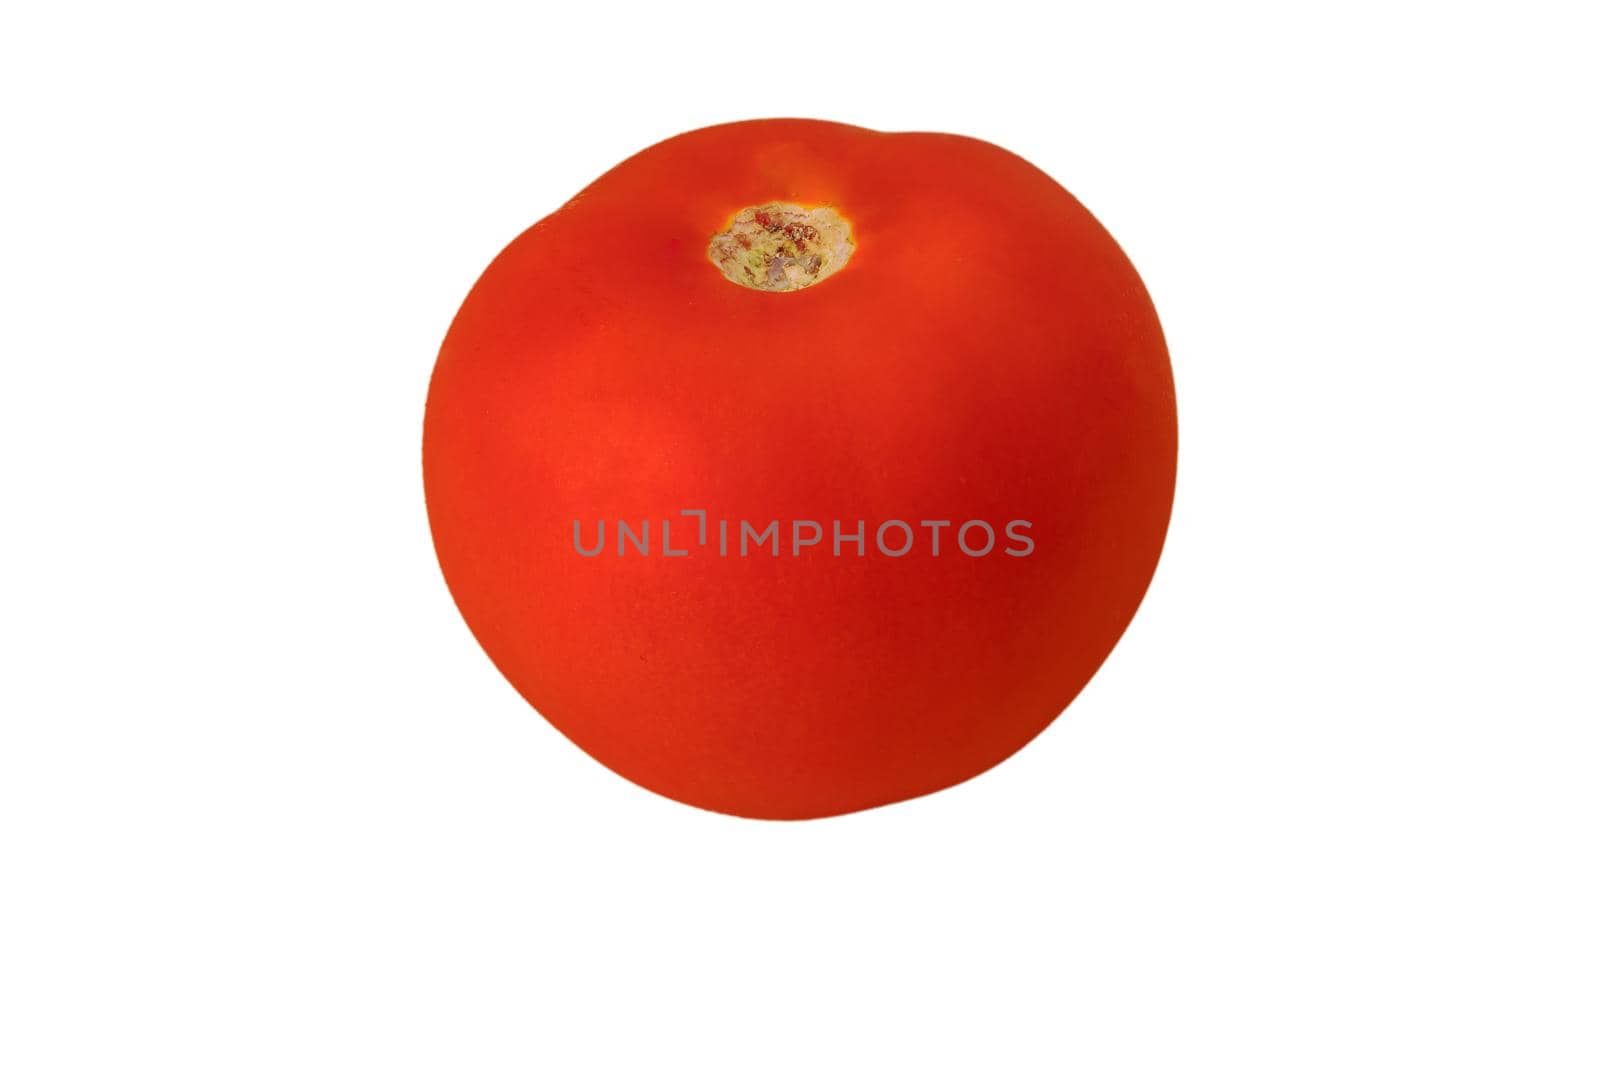 One whole red tomato on a white background in isolation